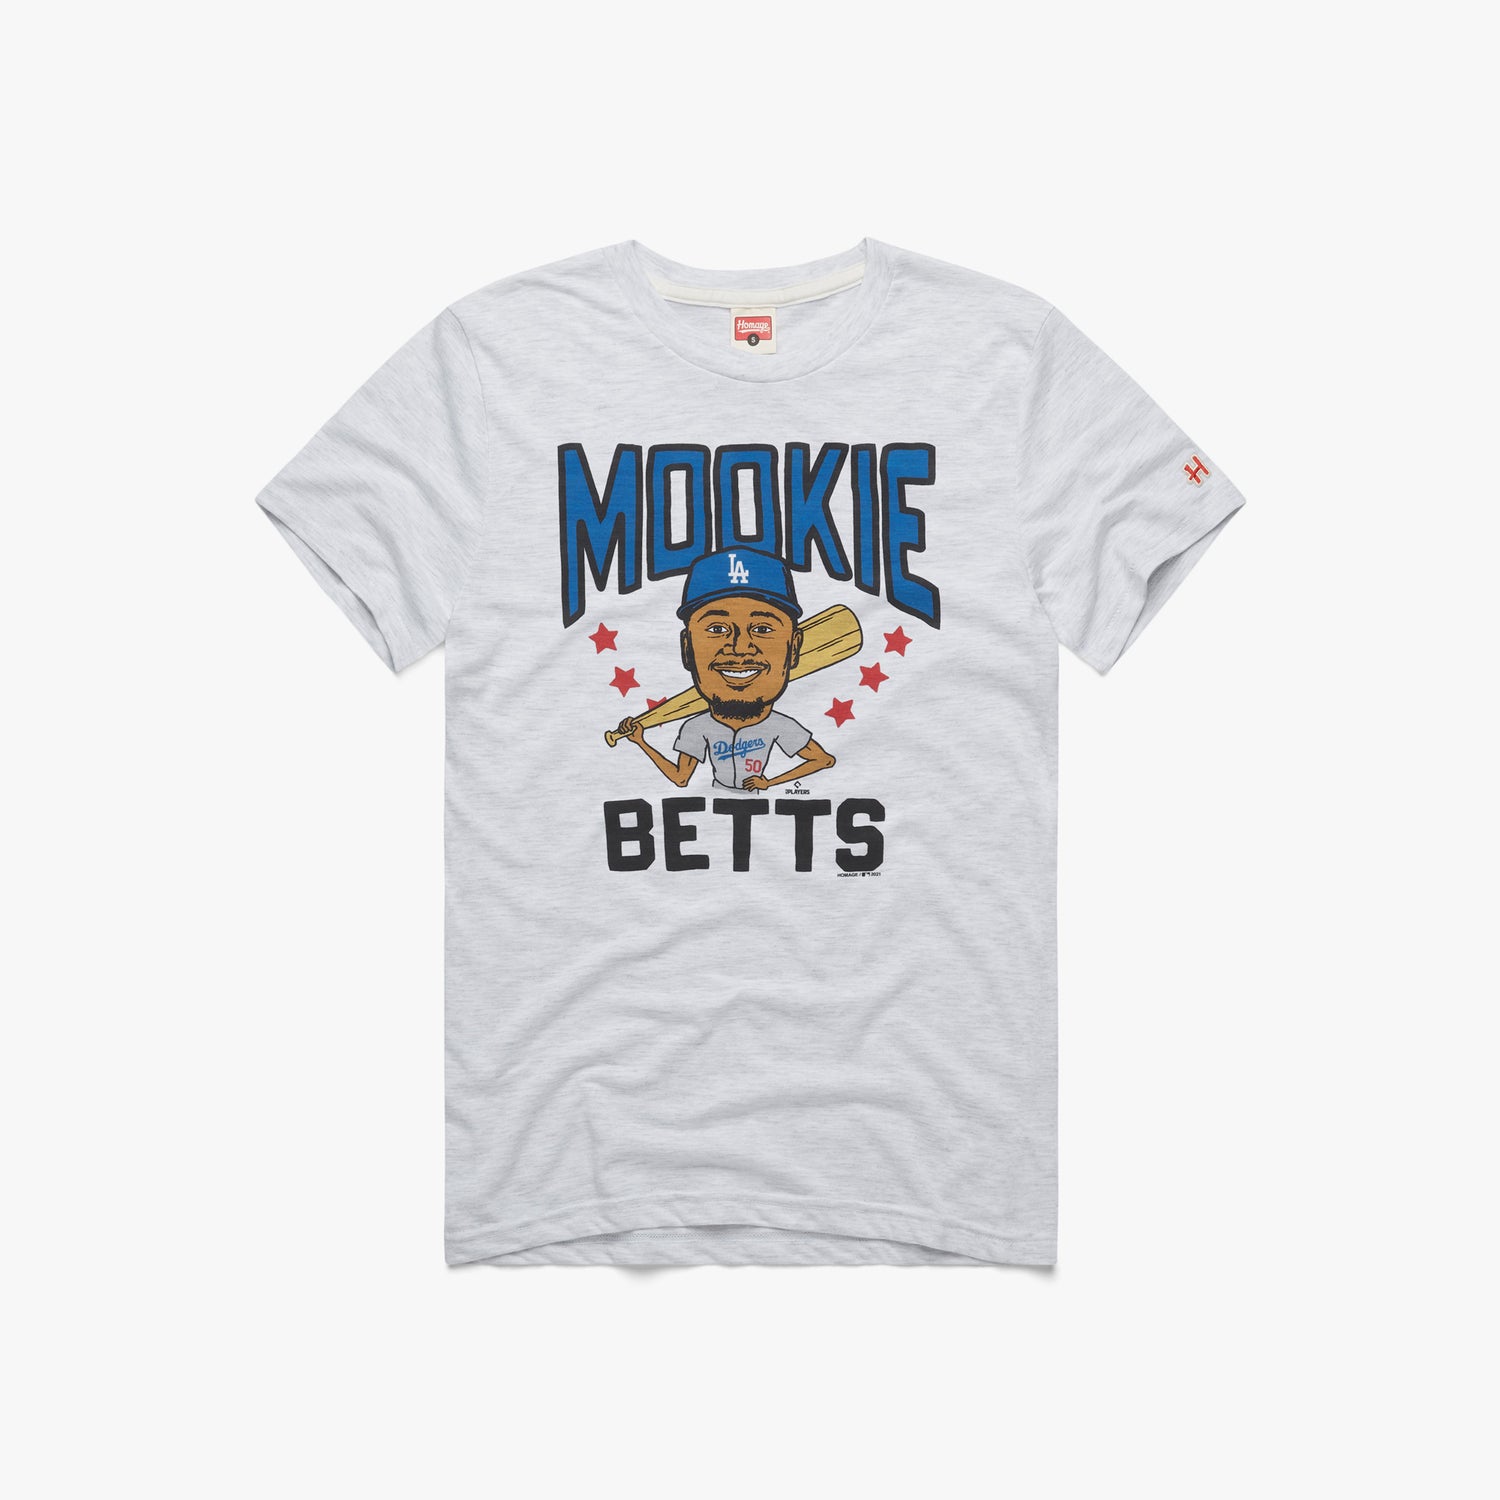 Los Angeles Dodgers Mookie Betts Toddler Name & Number T-Shirt 23 / 4T